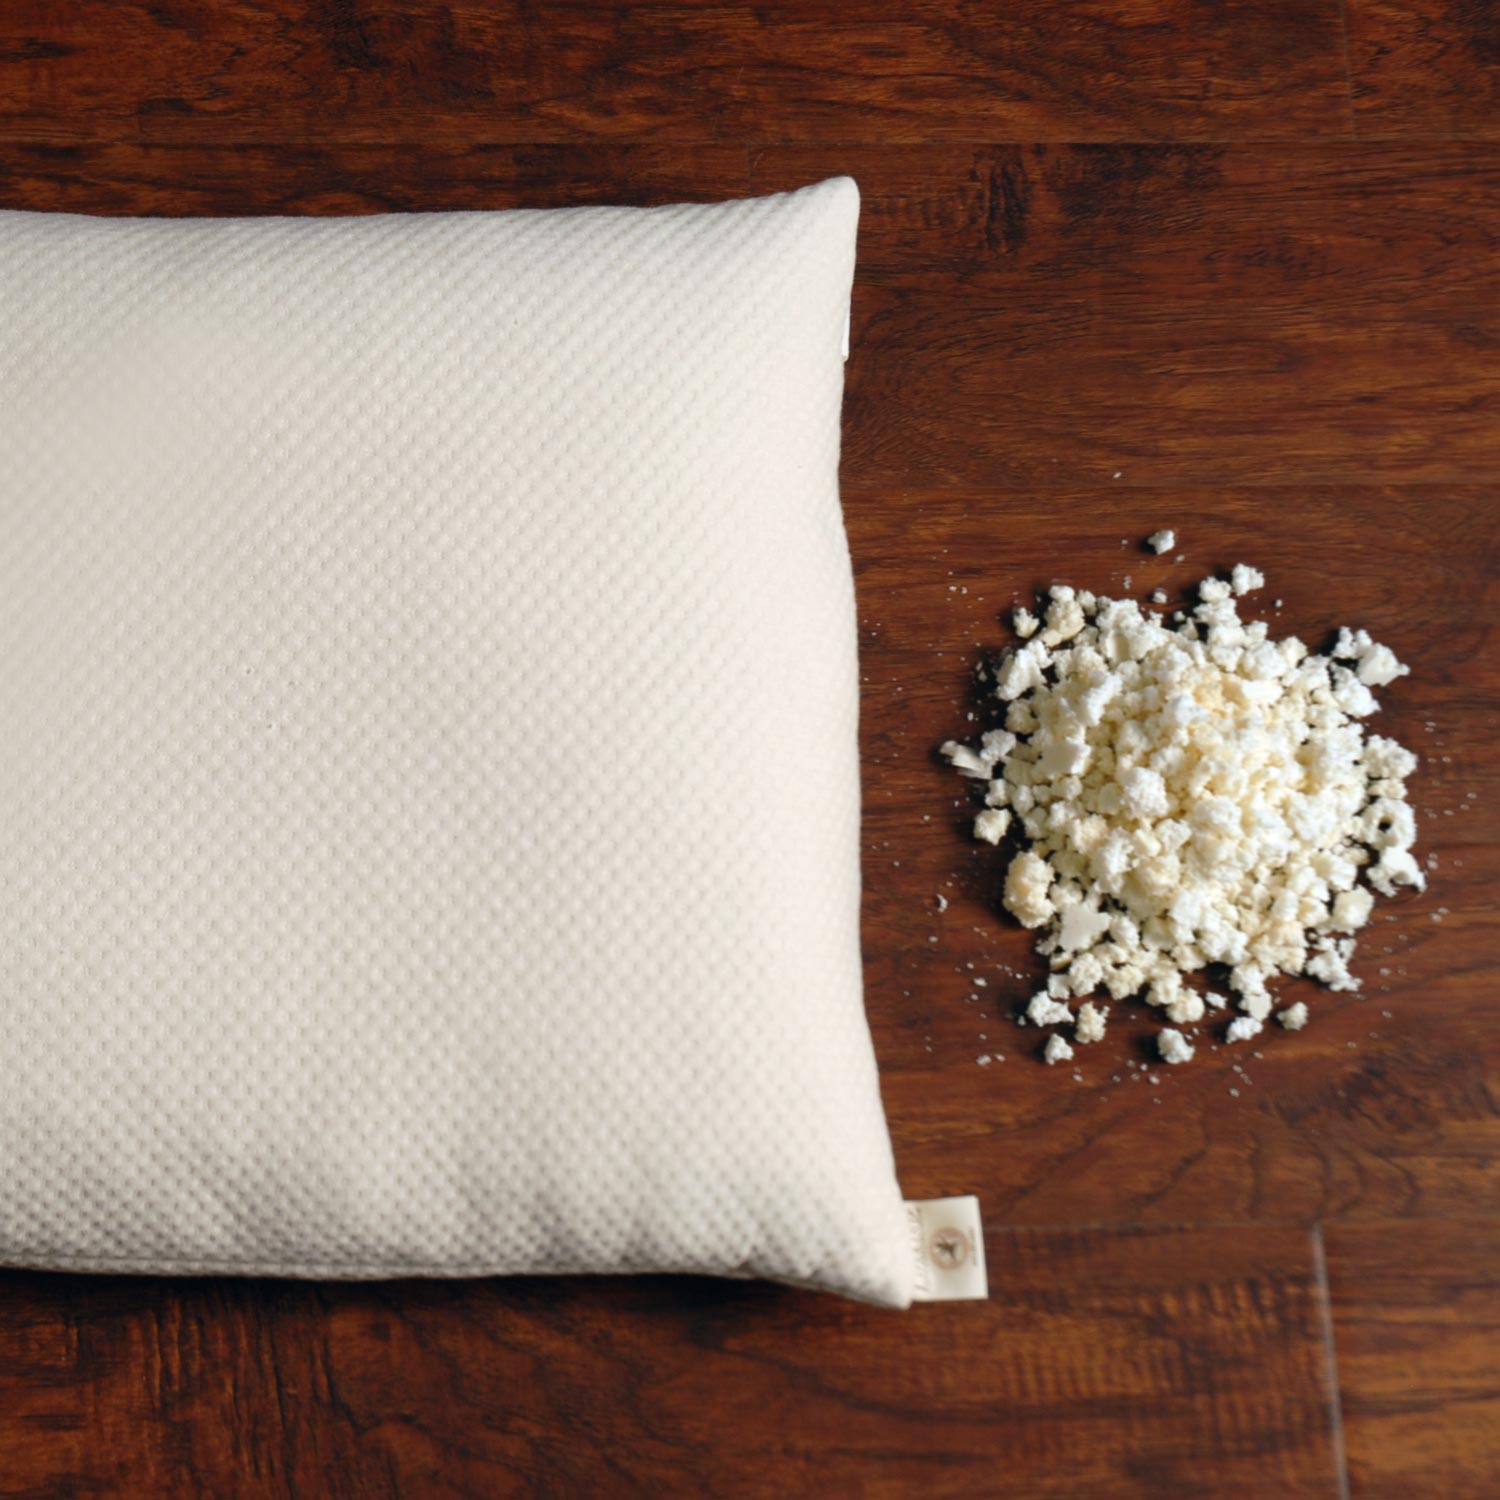 Natural Shredded Latex Decorative Pillow Inserts, 17, 20, 24 inches